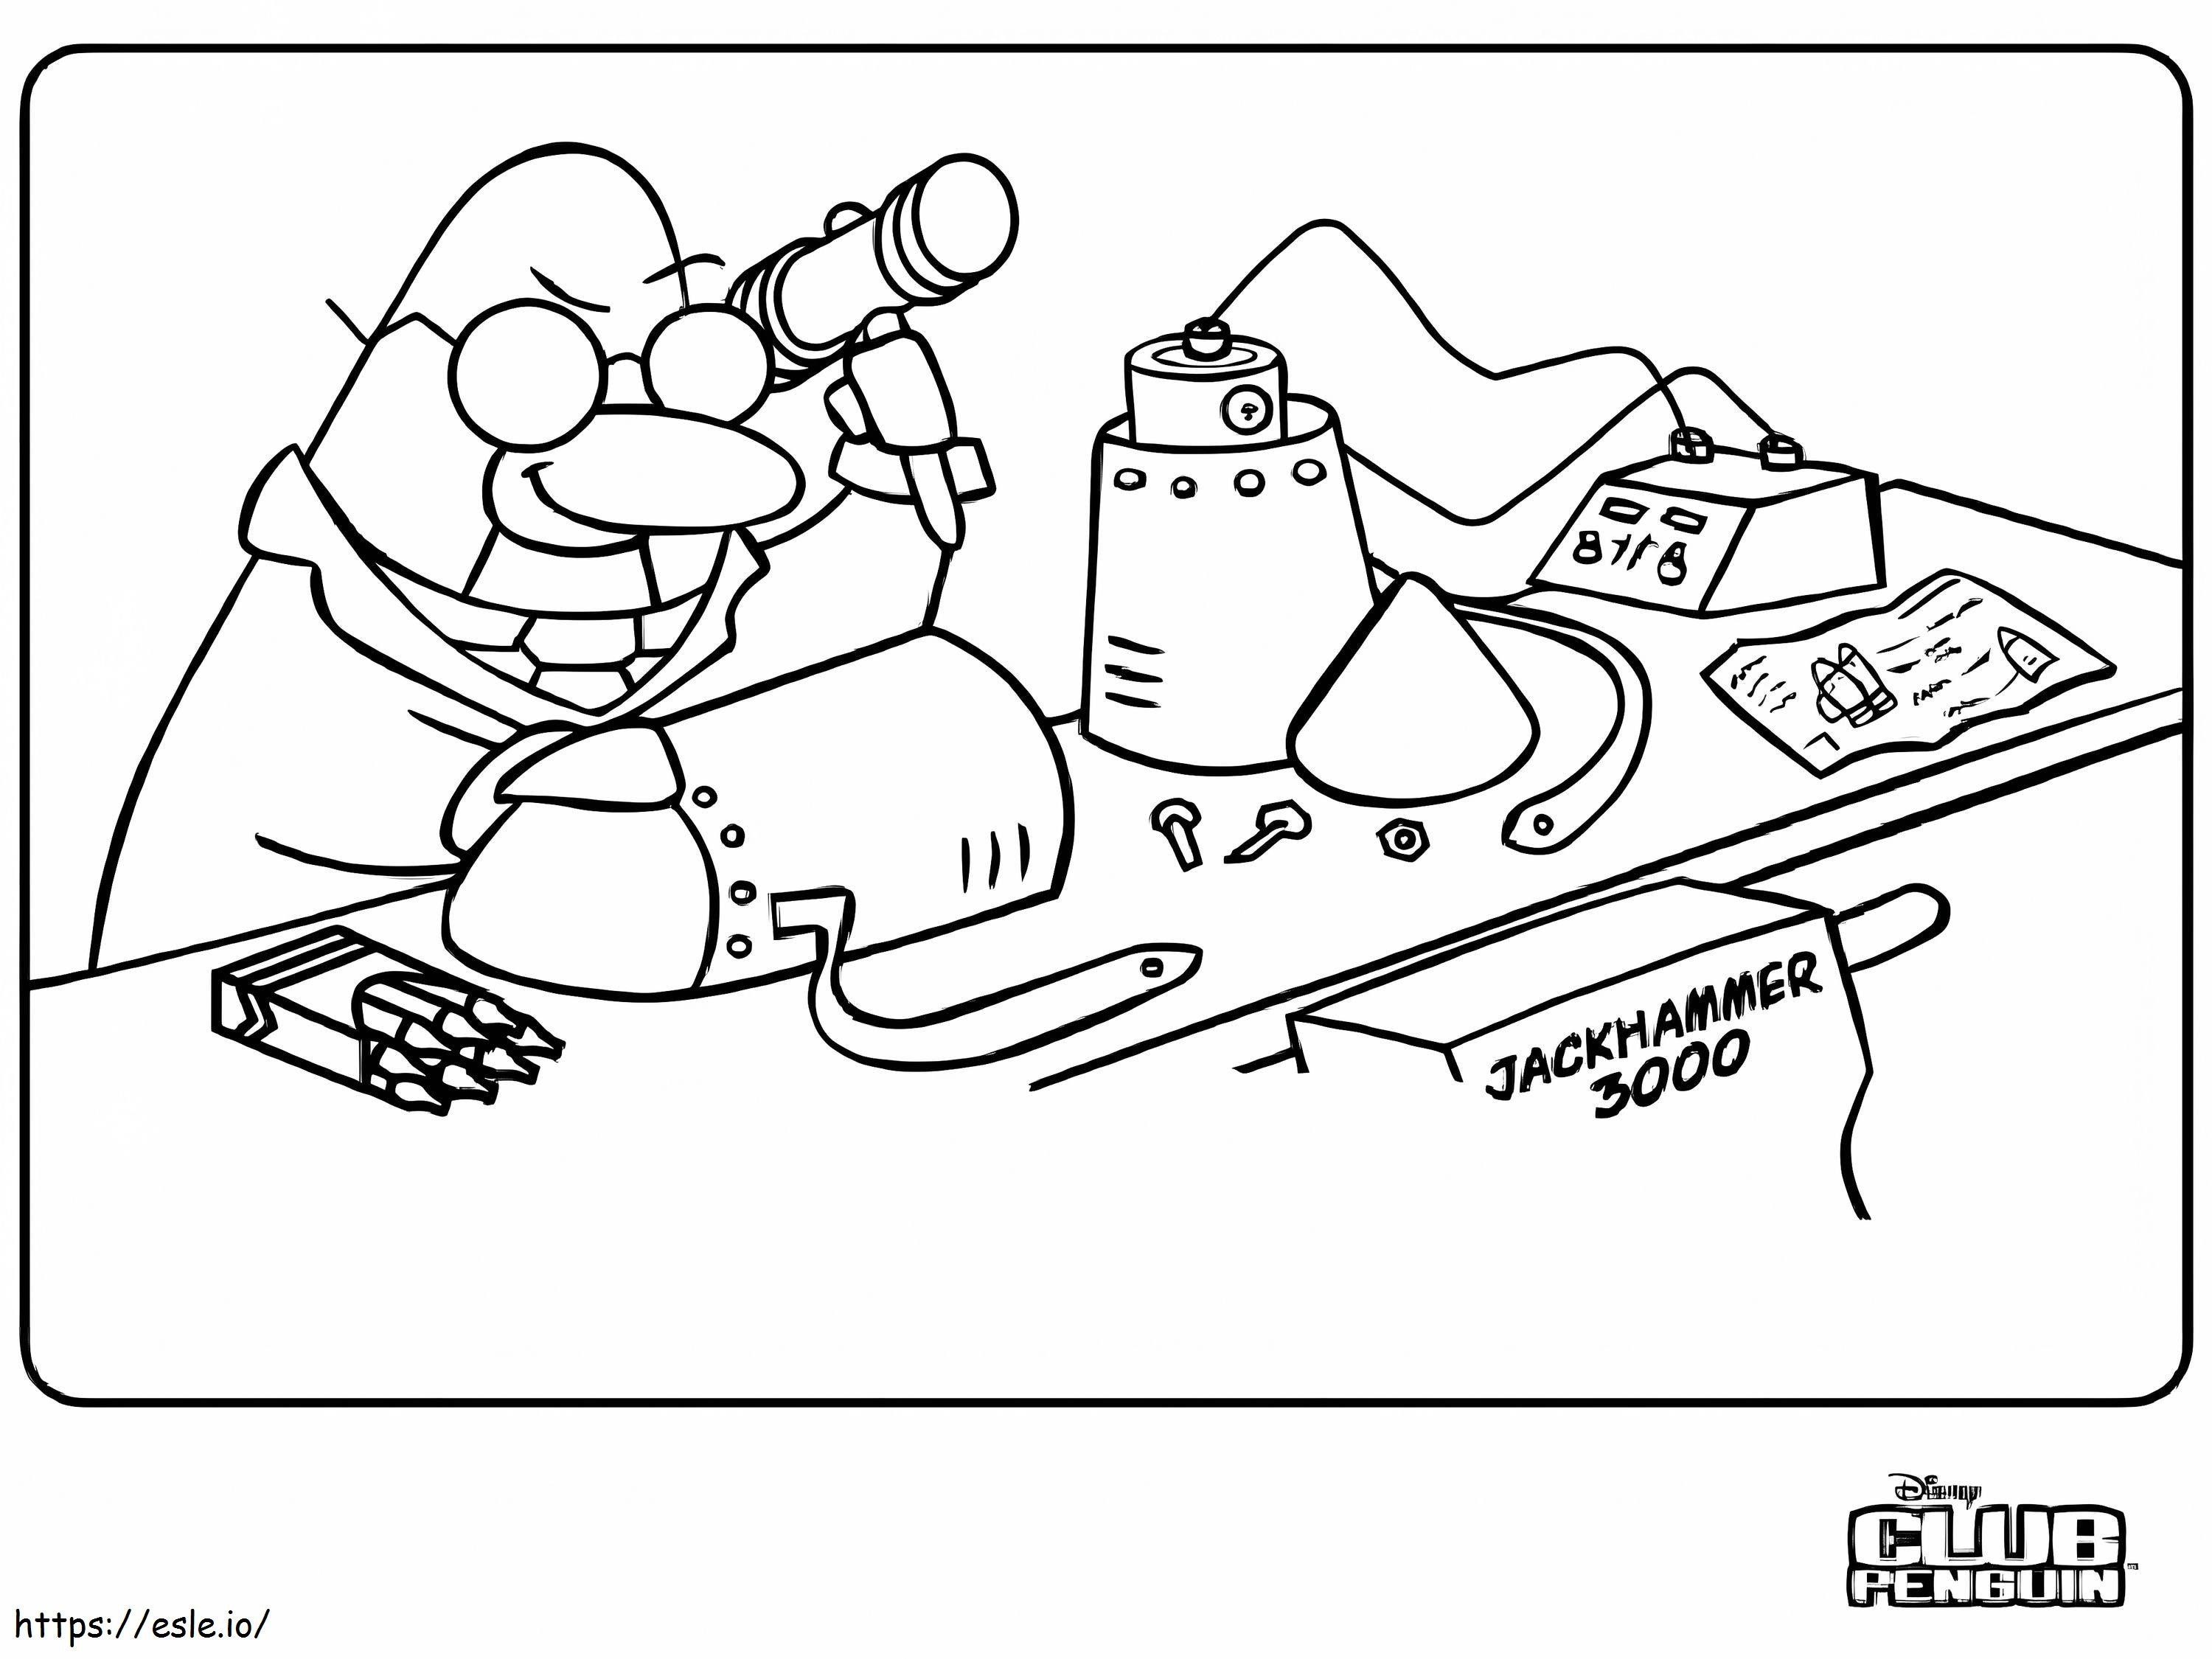 Club Penguin 7 coloring page